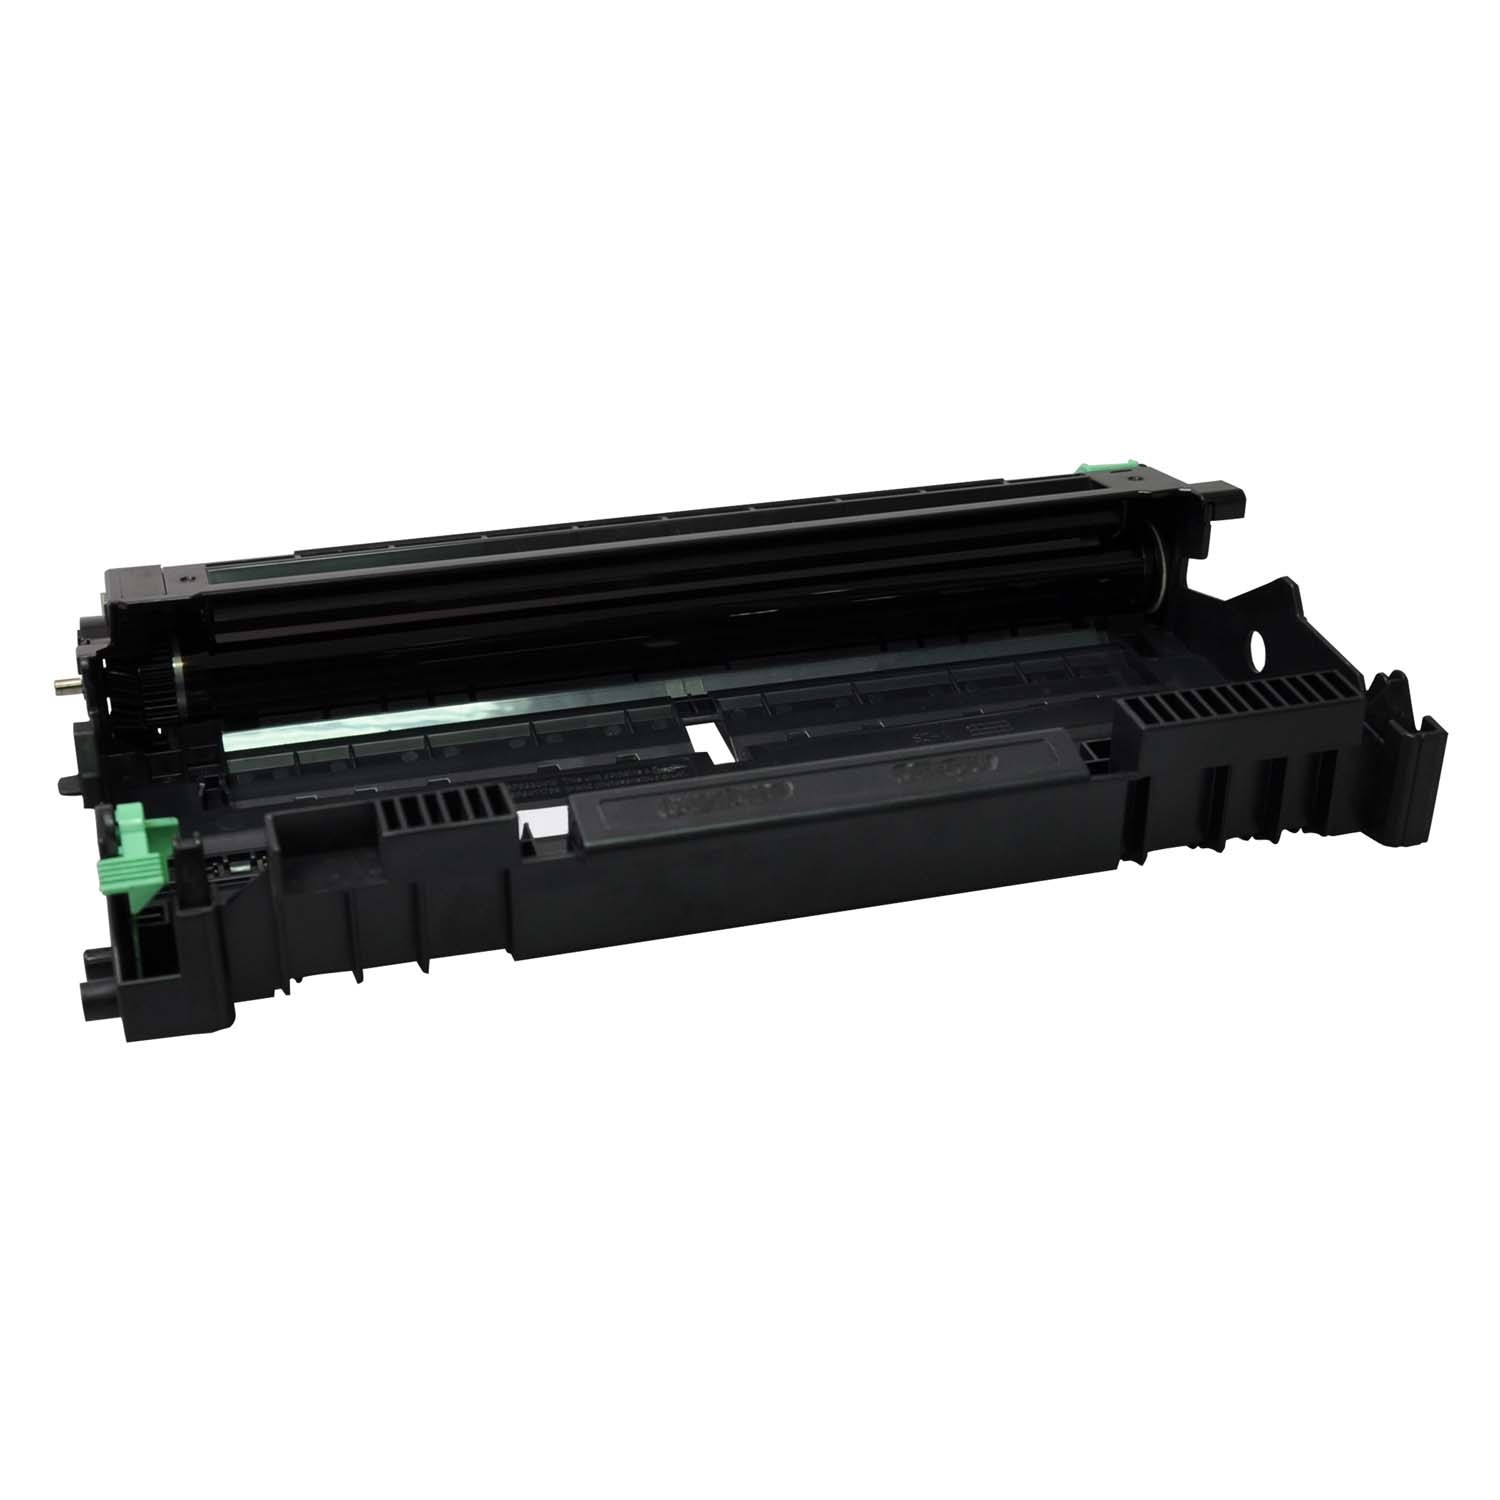 V7 Drum for select Brother printers - Replaces DR2100